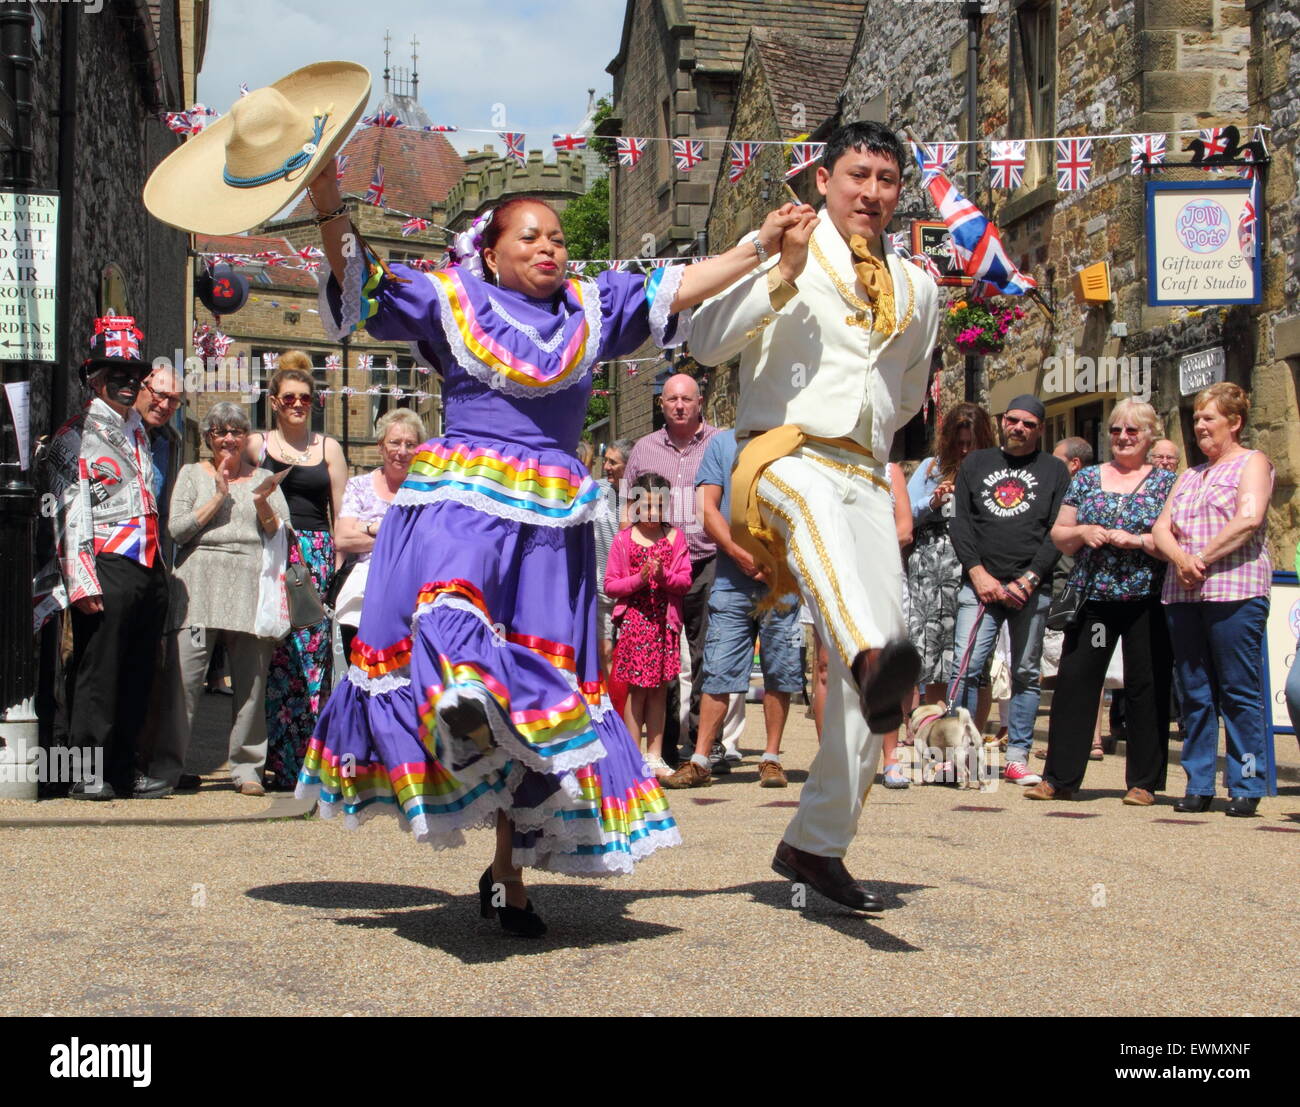 Mmbers of Son de America, a Latin American dance group perform outdoors at the Bakewell International Day of Dance, Bakewell UK Stock Photo